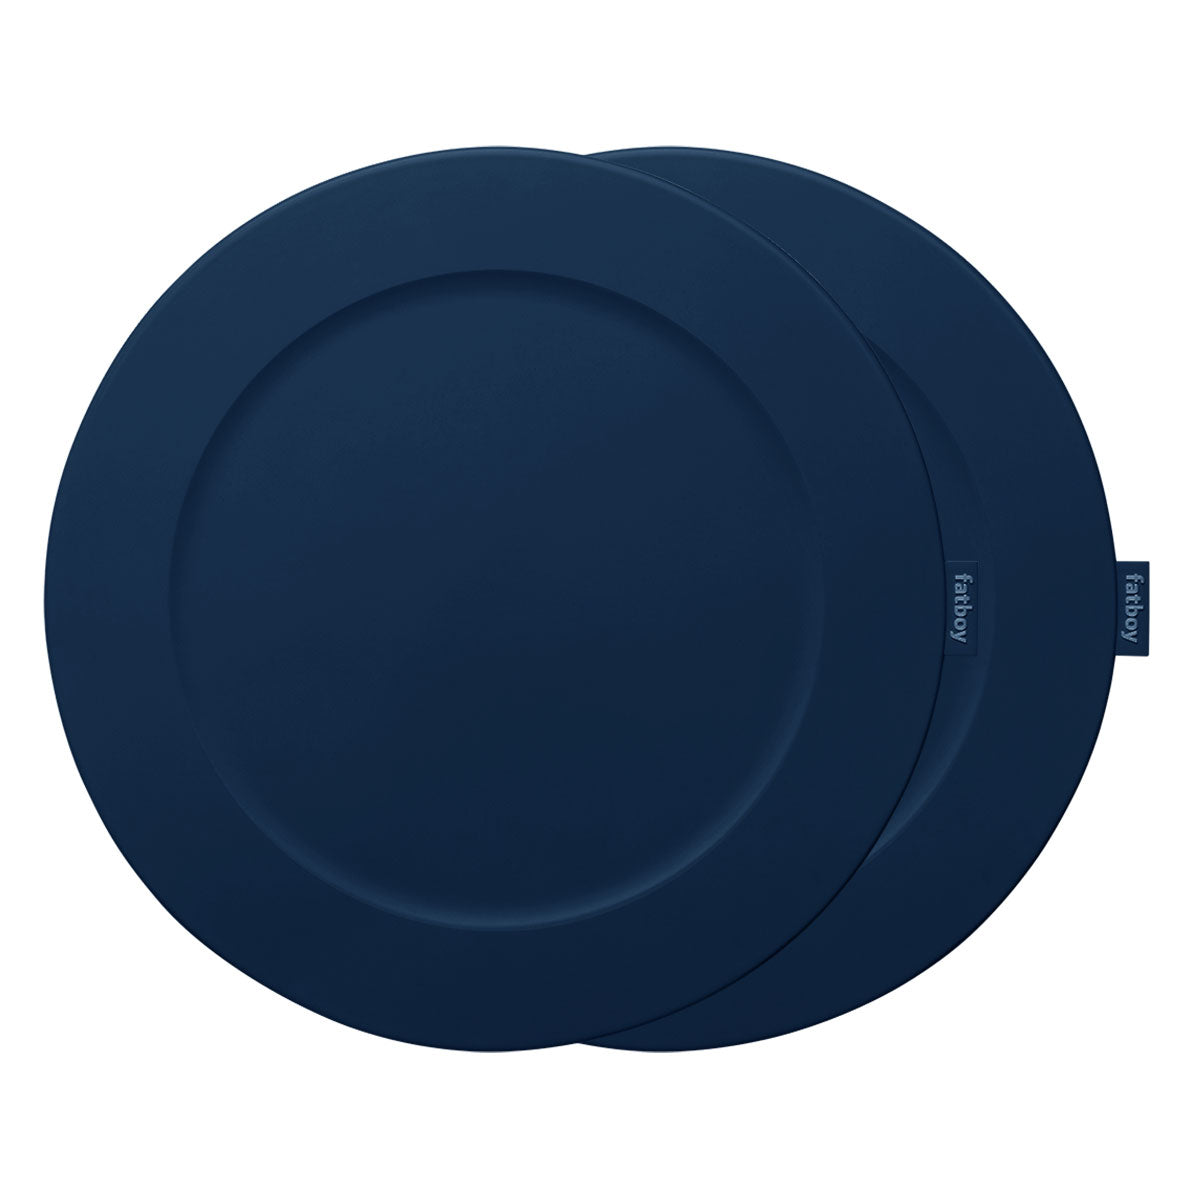 <transcy>Placemat Fatboy Place-we-met in different Colors</transcy>